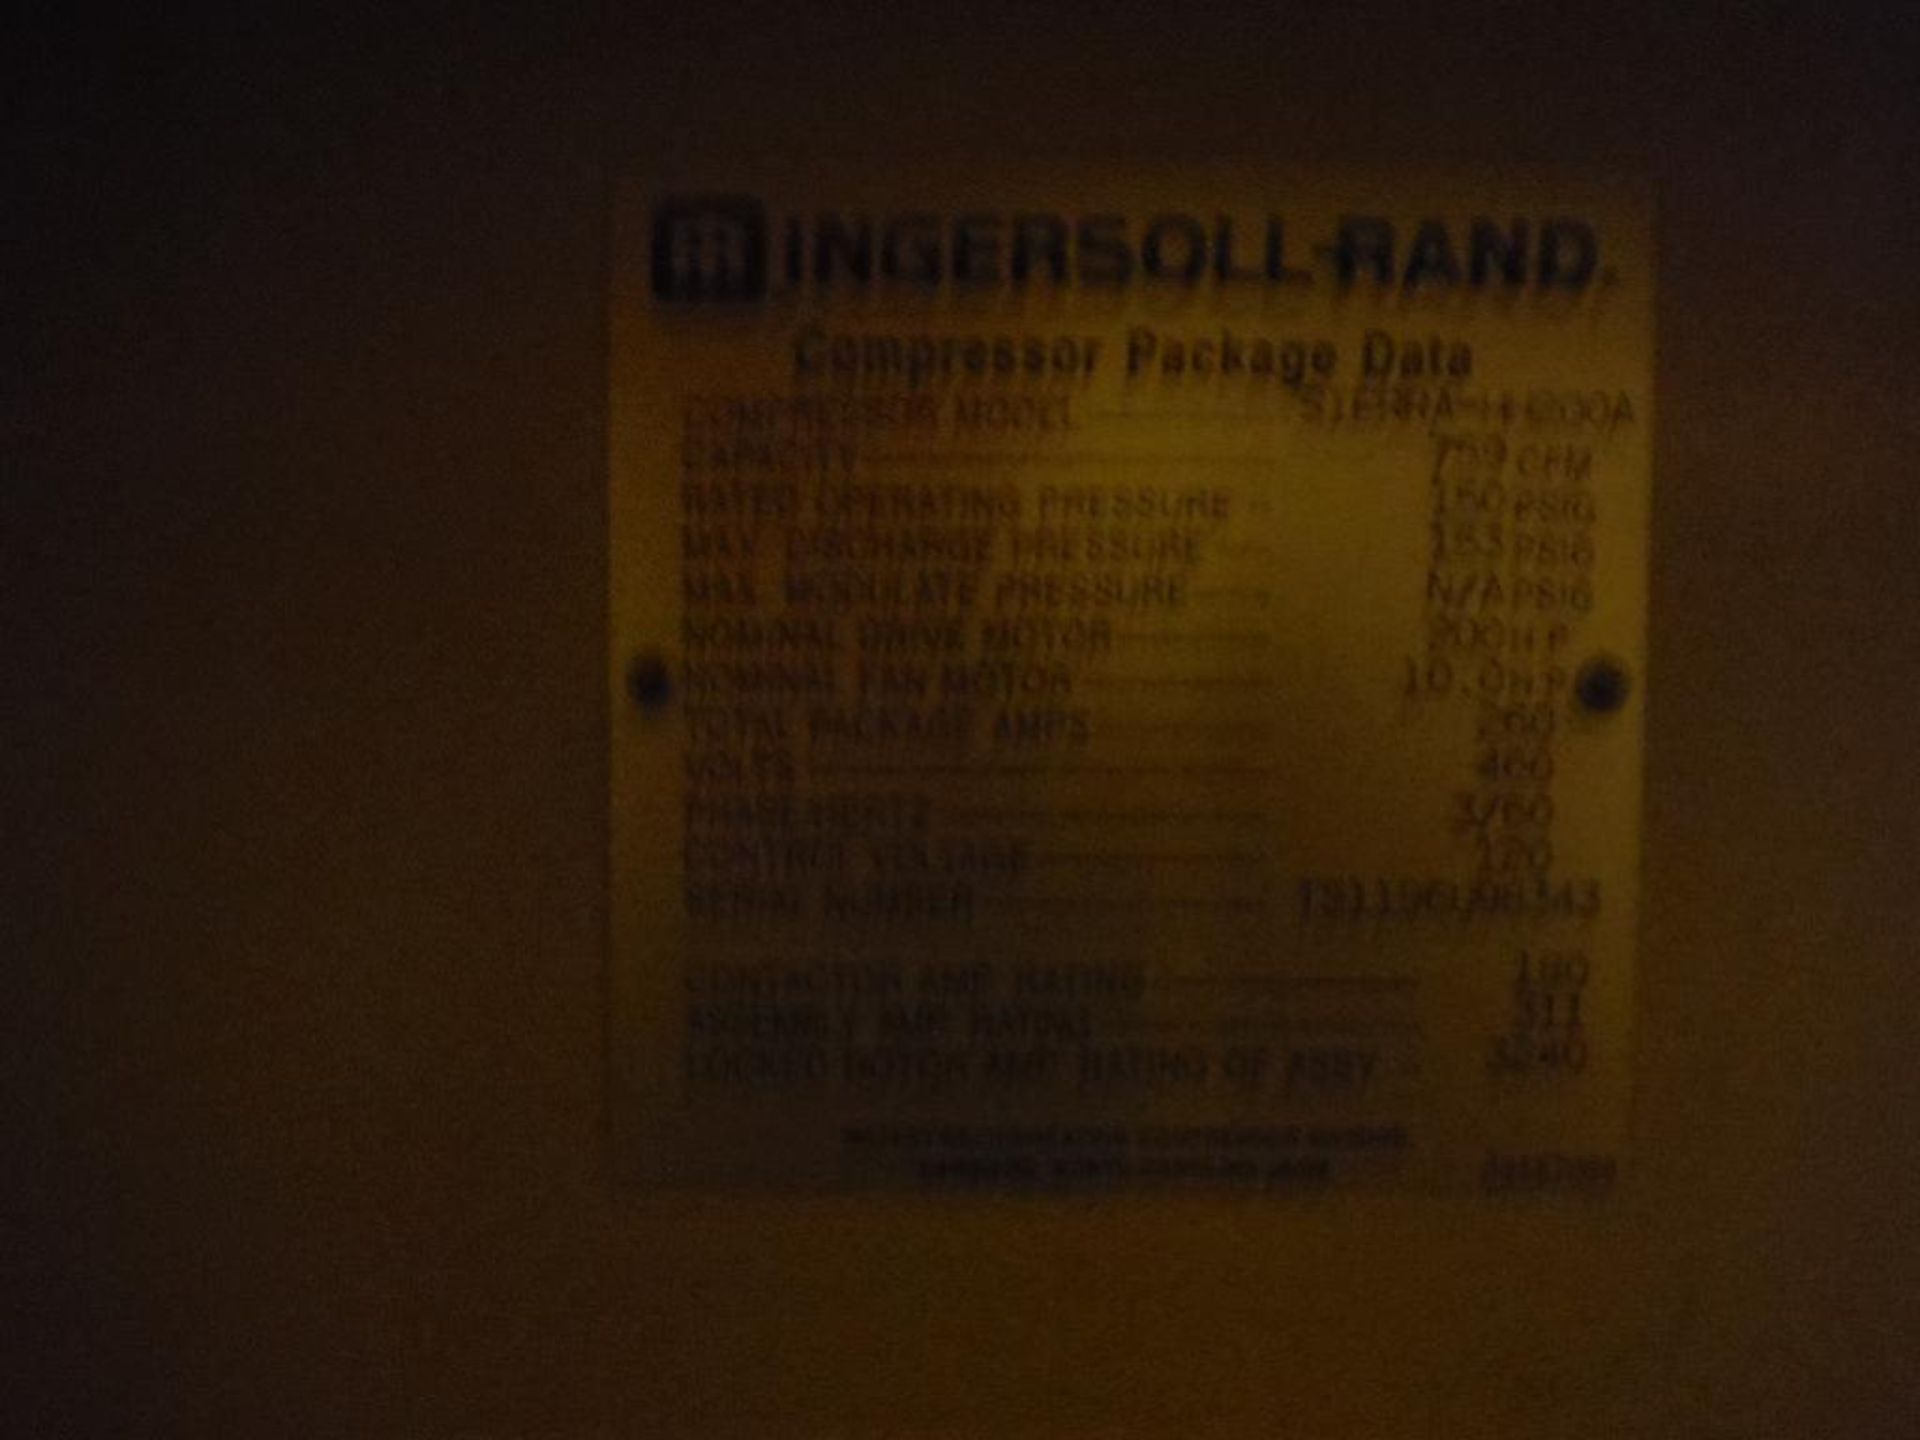 Ingersoll Rand Compressor, Model S-HH200A, SN TS1196U98343, 759 cfm, 200 hp, 460V, 3 phase, approx. - Image 6 of 11